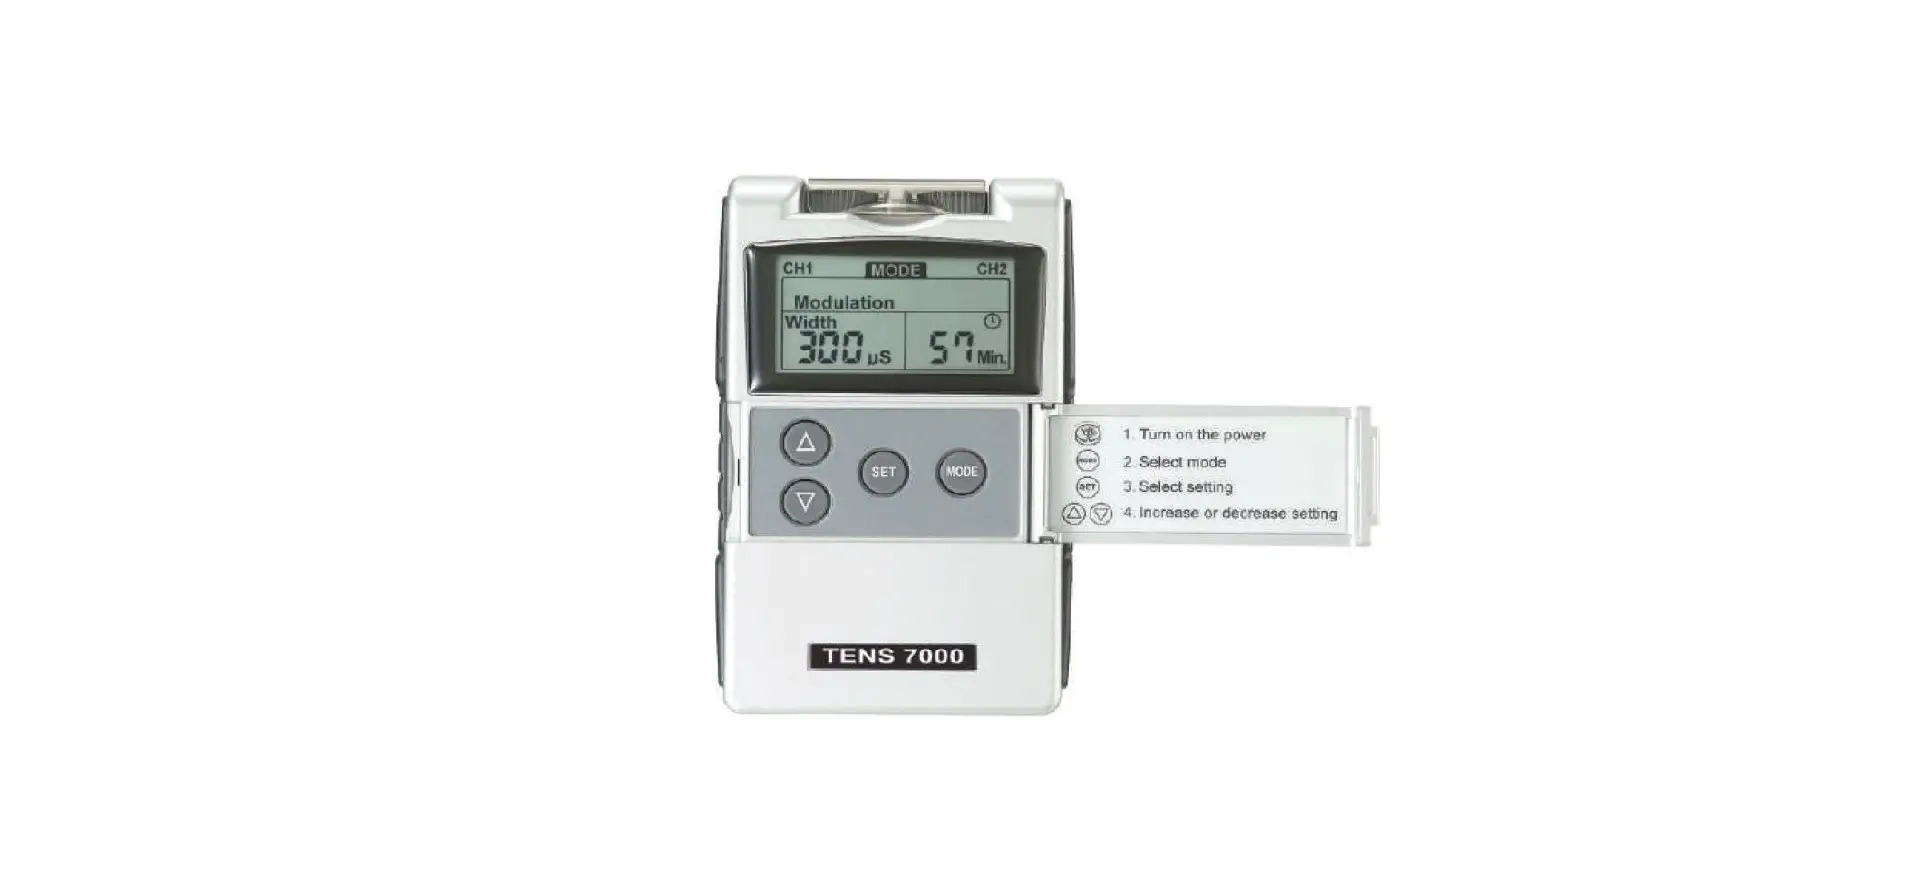 TENS 7000 Muscle Stimulator and Pain Relief Device